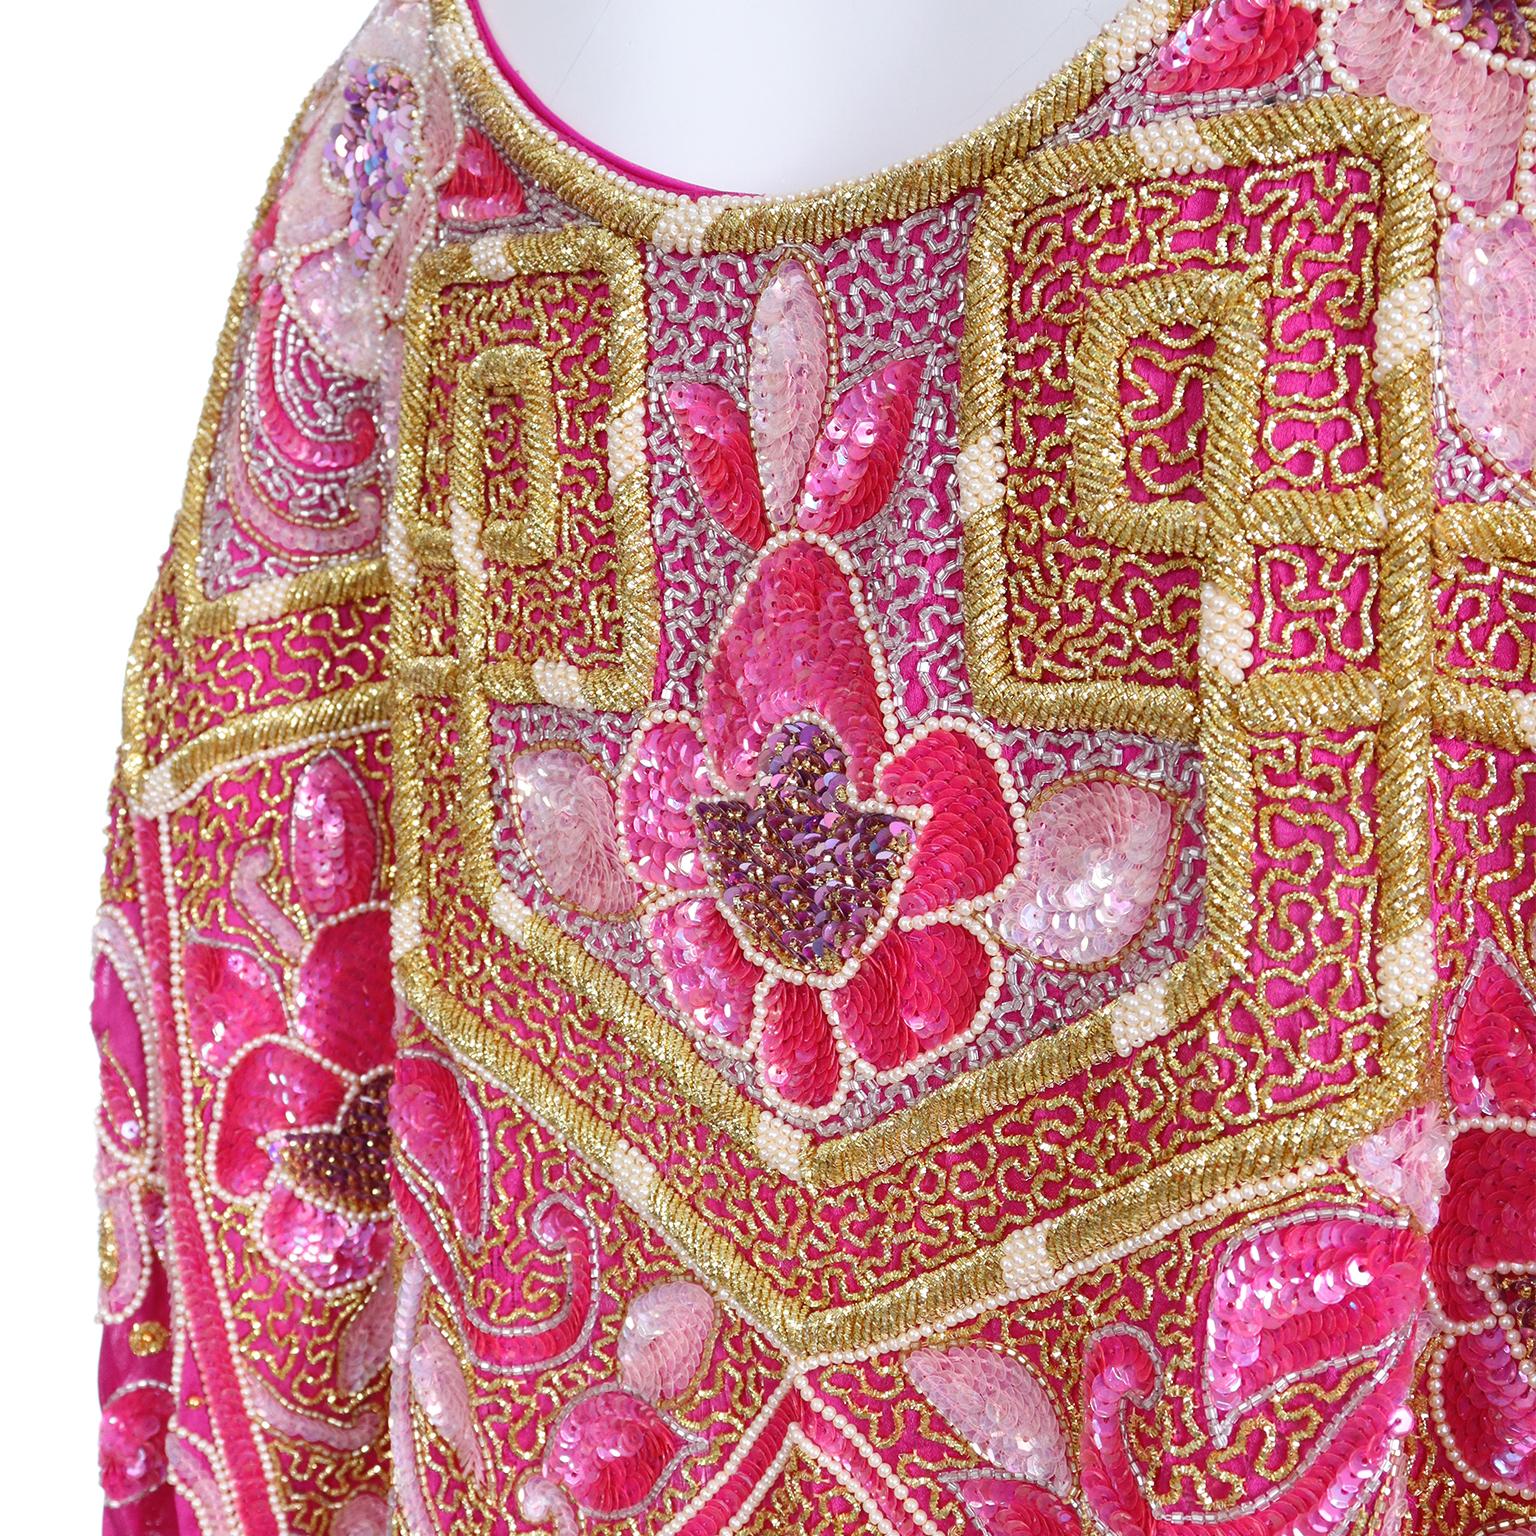 Vintage Floral Hot Pink Caftan Dress With Raised Gold Metallic Beading & Sequins 2